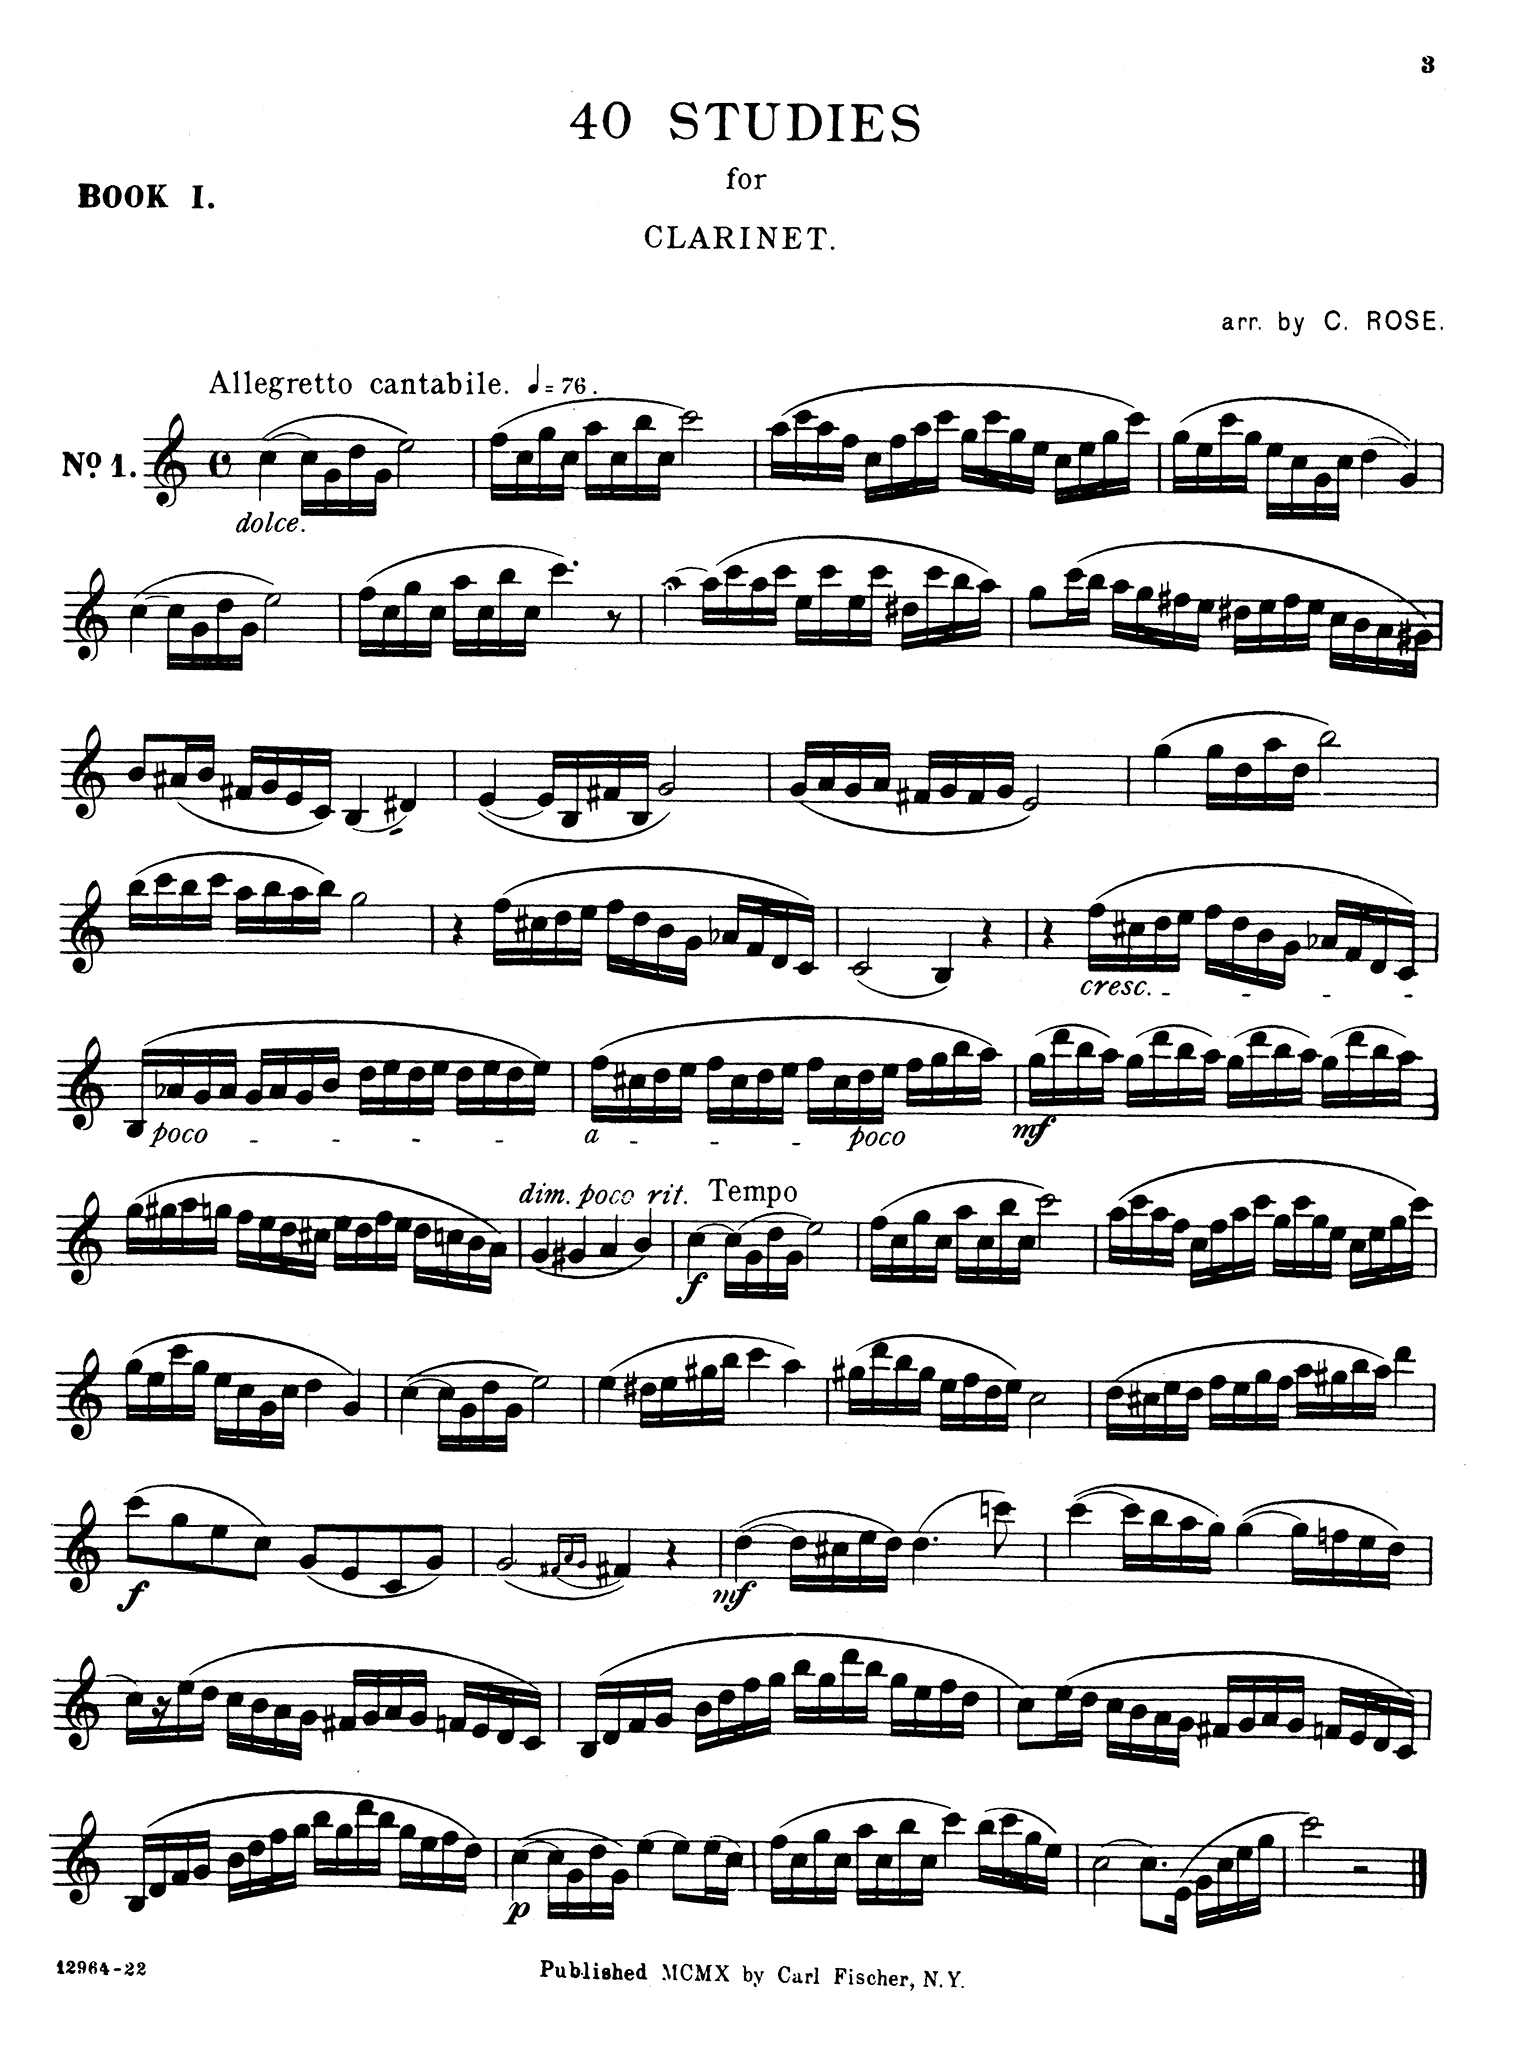 40 Etudes for Clarinet, Book 1 Page 3